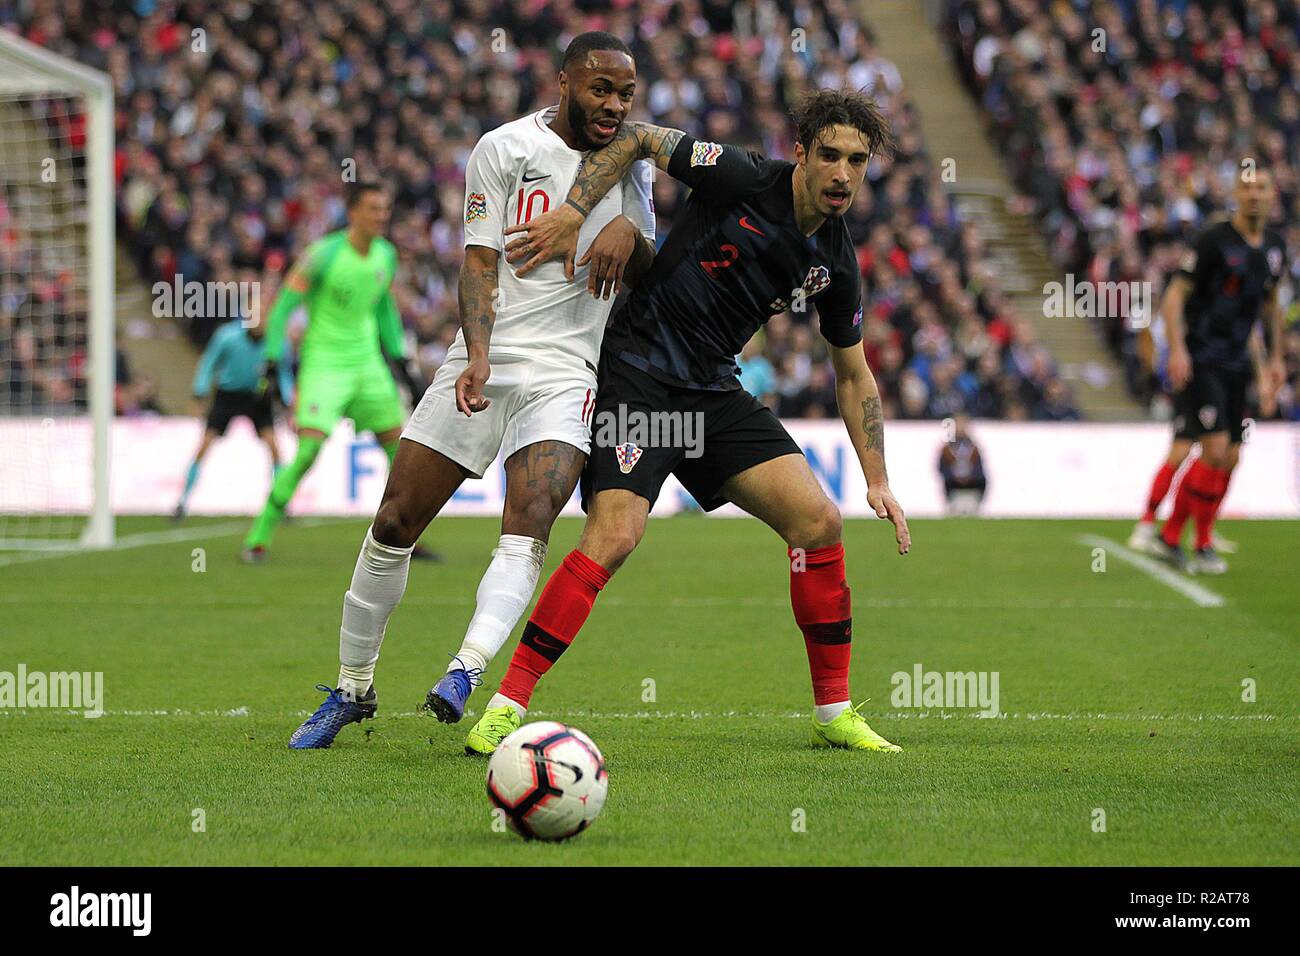 London, UK. 18th November 2018. Raheem Sterling of England and Sime Vrsaljko of Croatia during the UEFA Nations League League A Group 4 match between England and Croatia at Wembley Stadium on November 18th 2018 in London, England. (Photo by Matt Bradshaw/phcimages.com) Credit: PHC Images/Alamy Live News Stock Photo